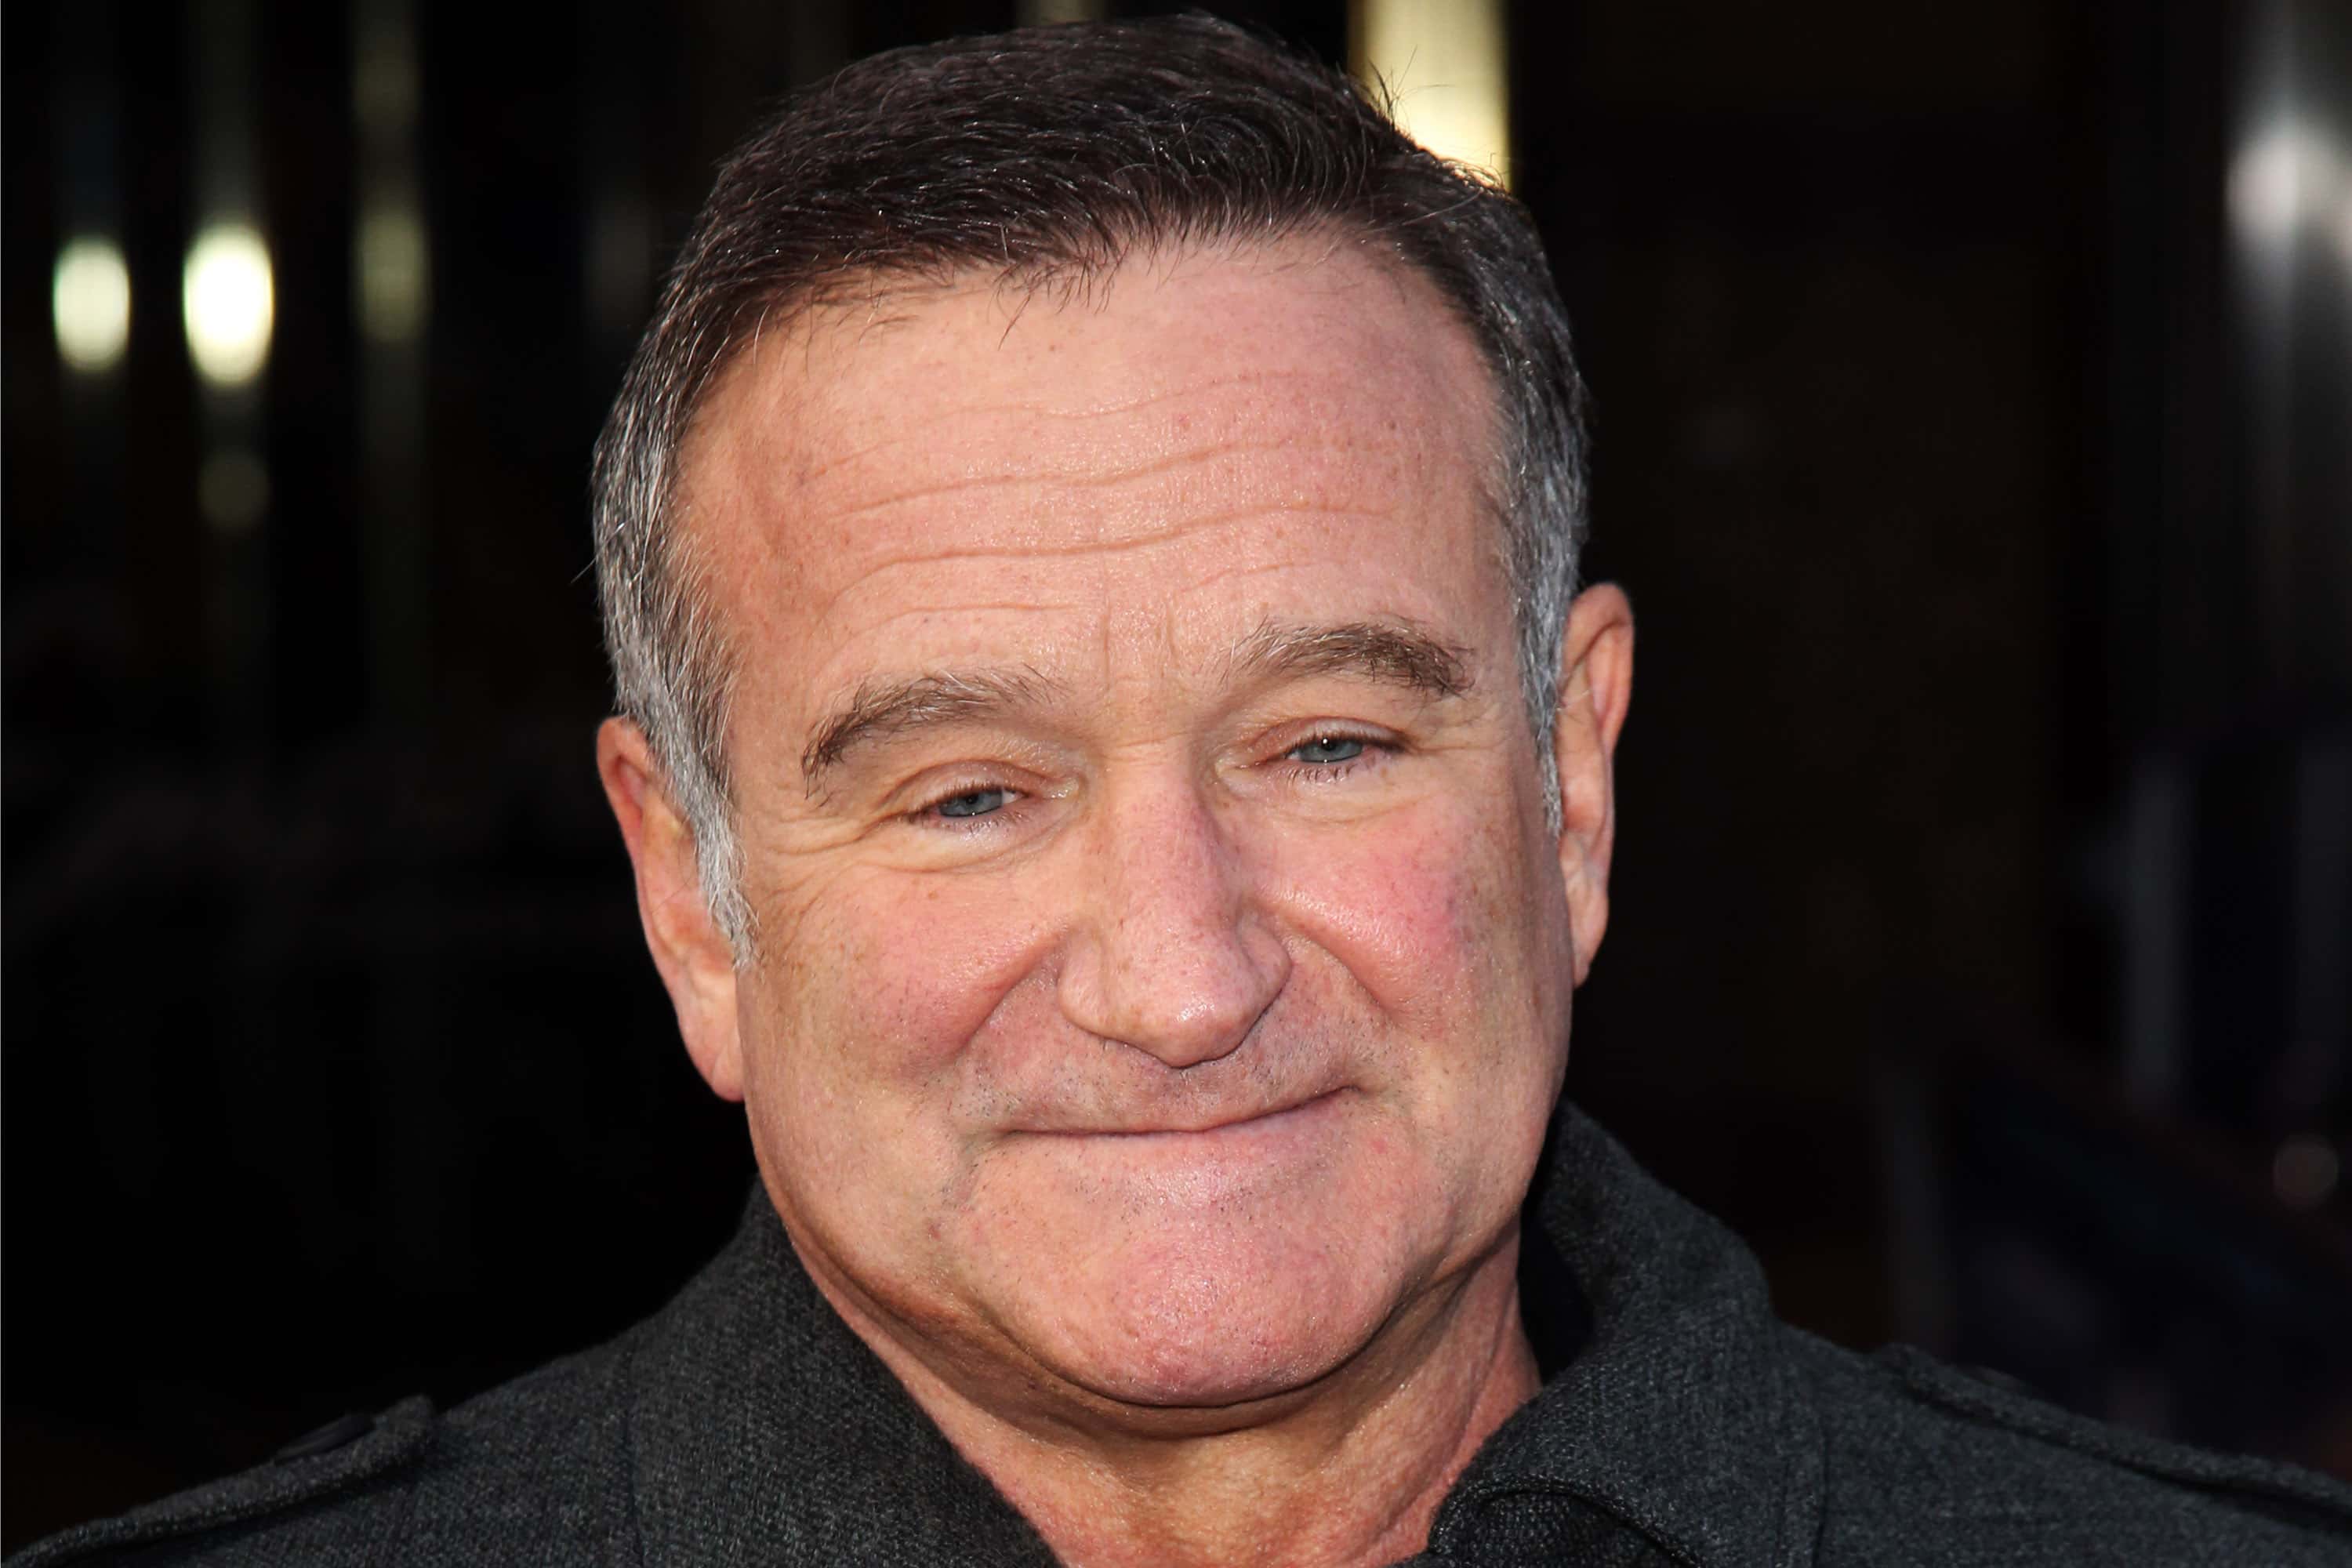 43 Absolutely Heartwarming Facts About Robin Williams - Factinate